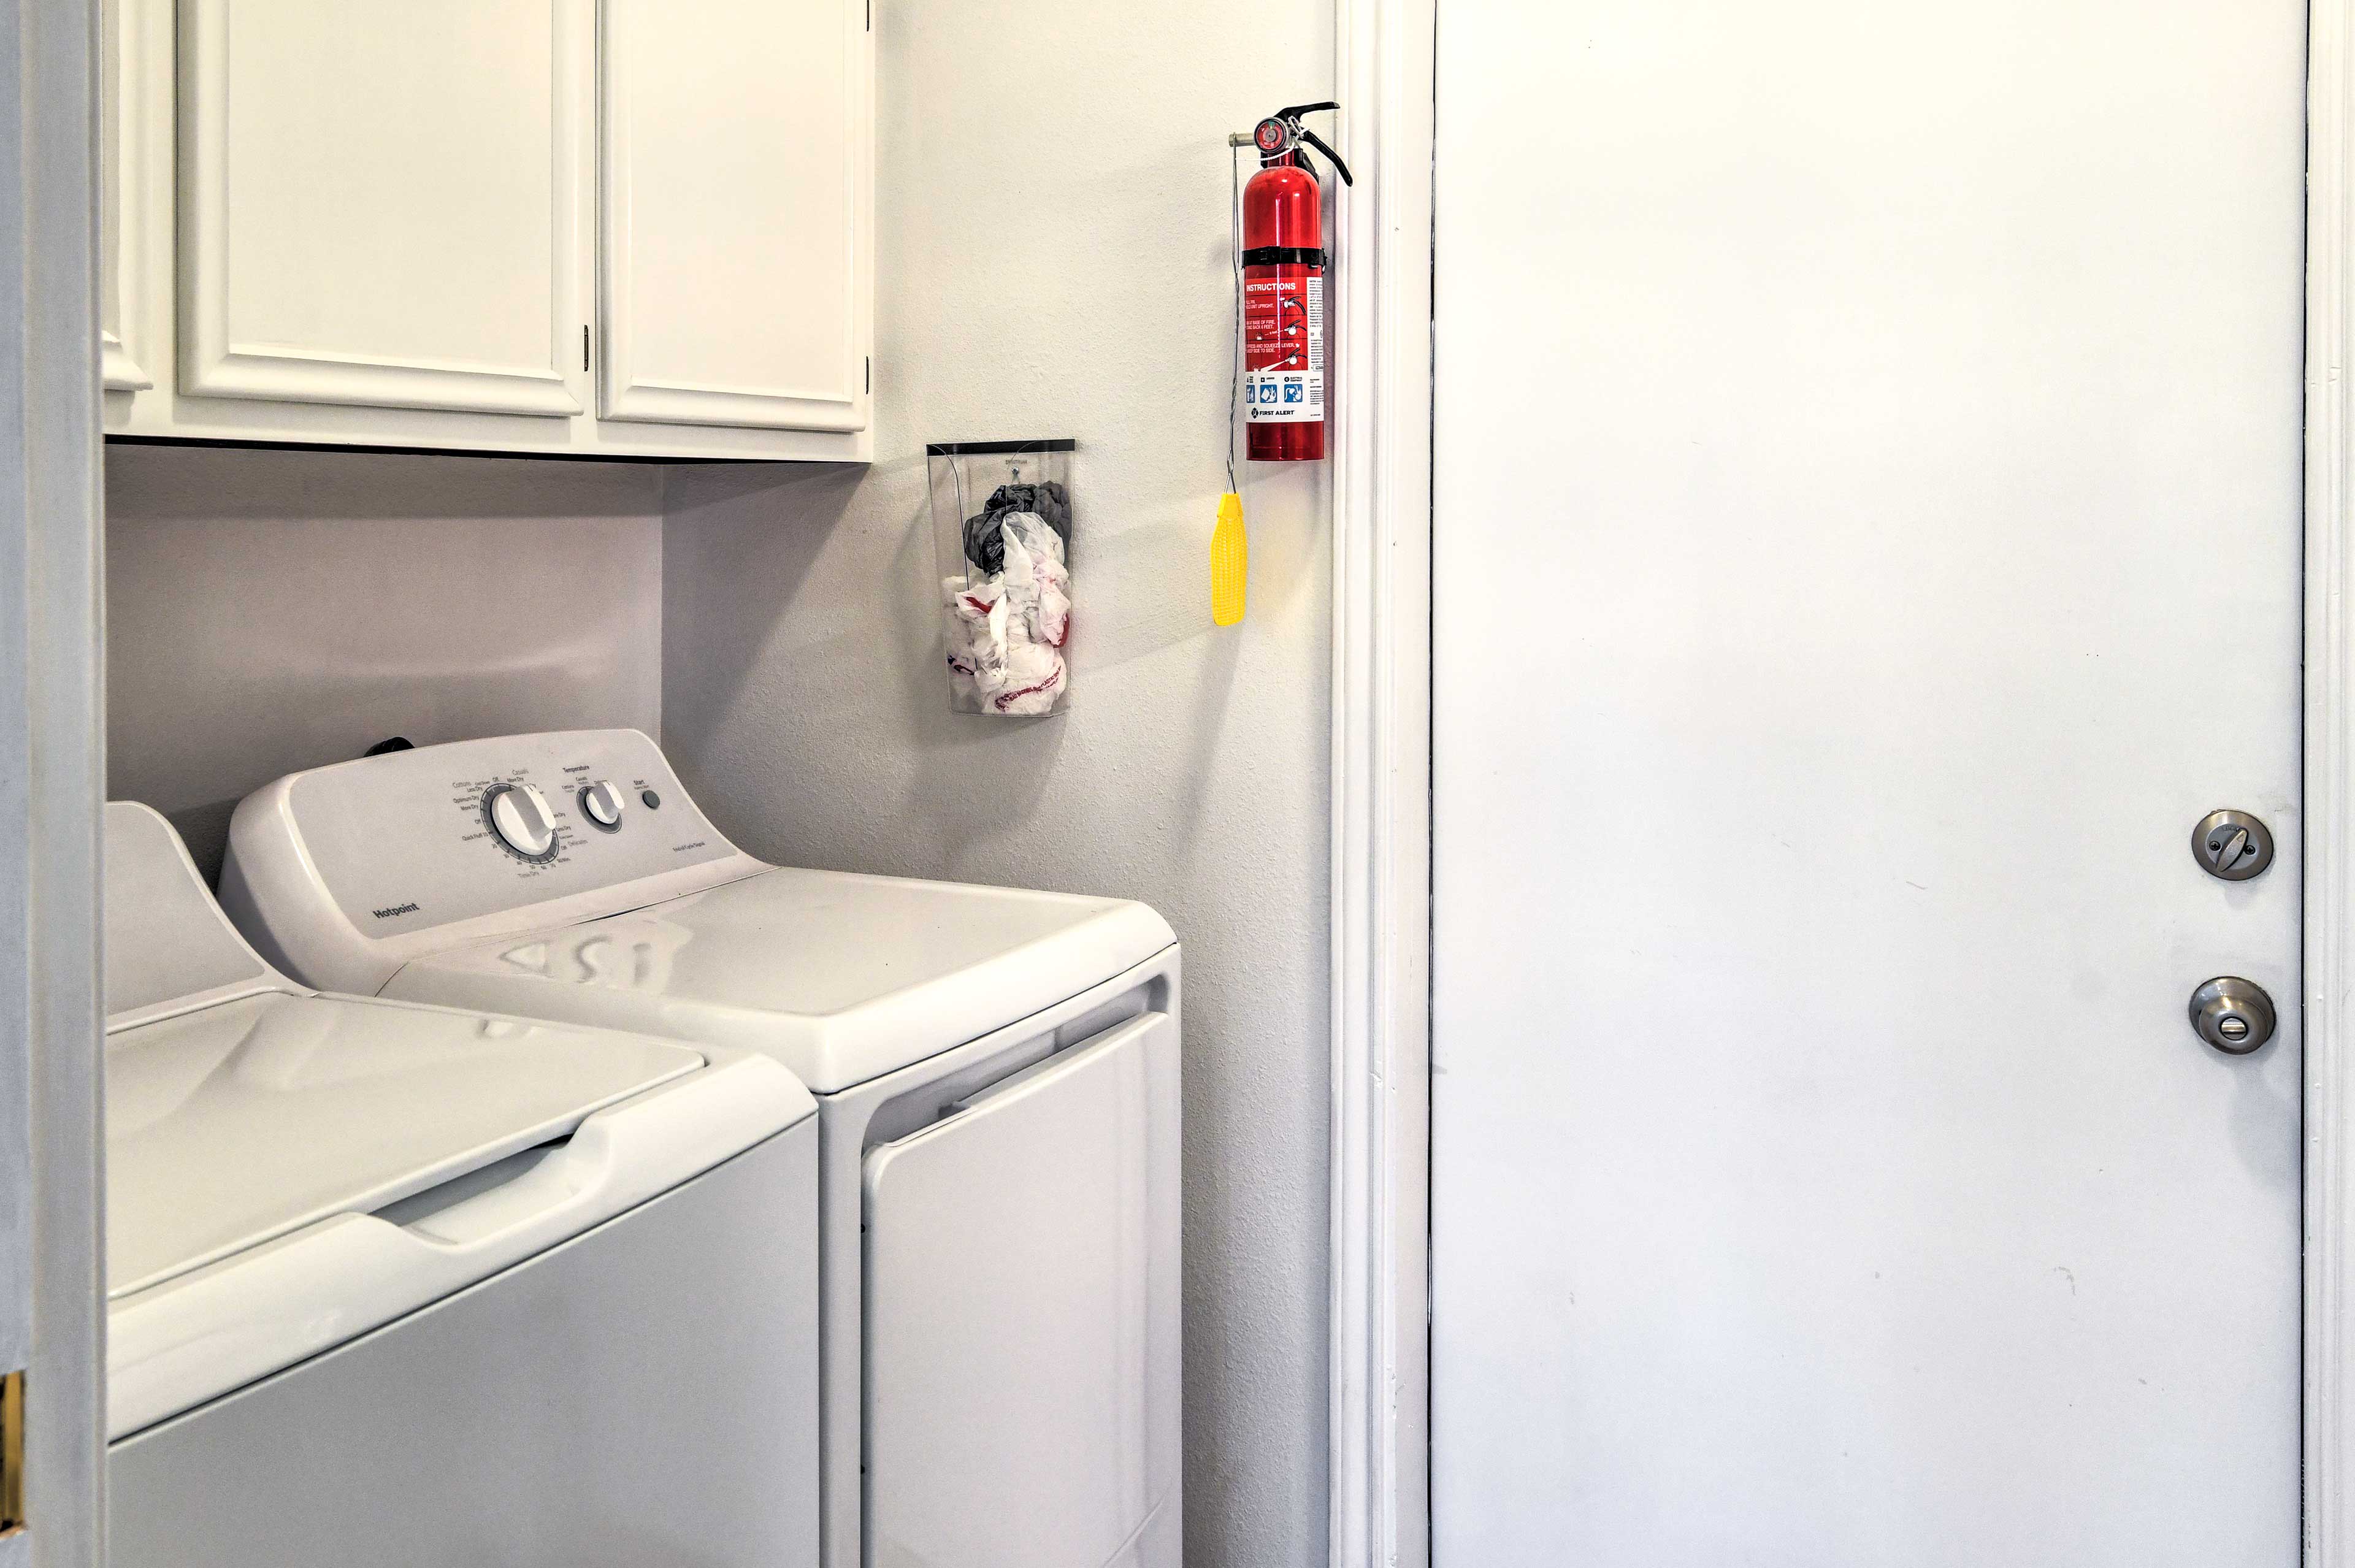 Laundry Room | Washer + Dryer | Laundry Detergent